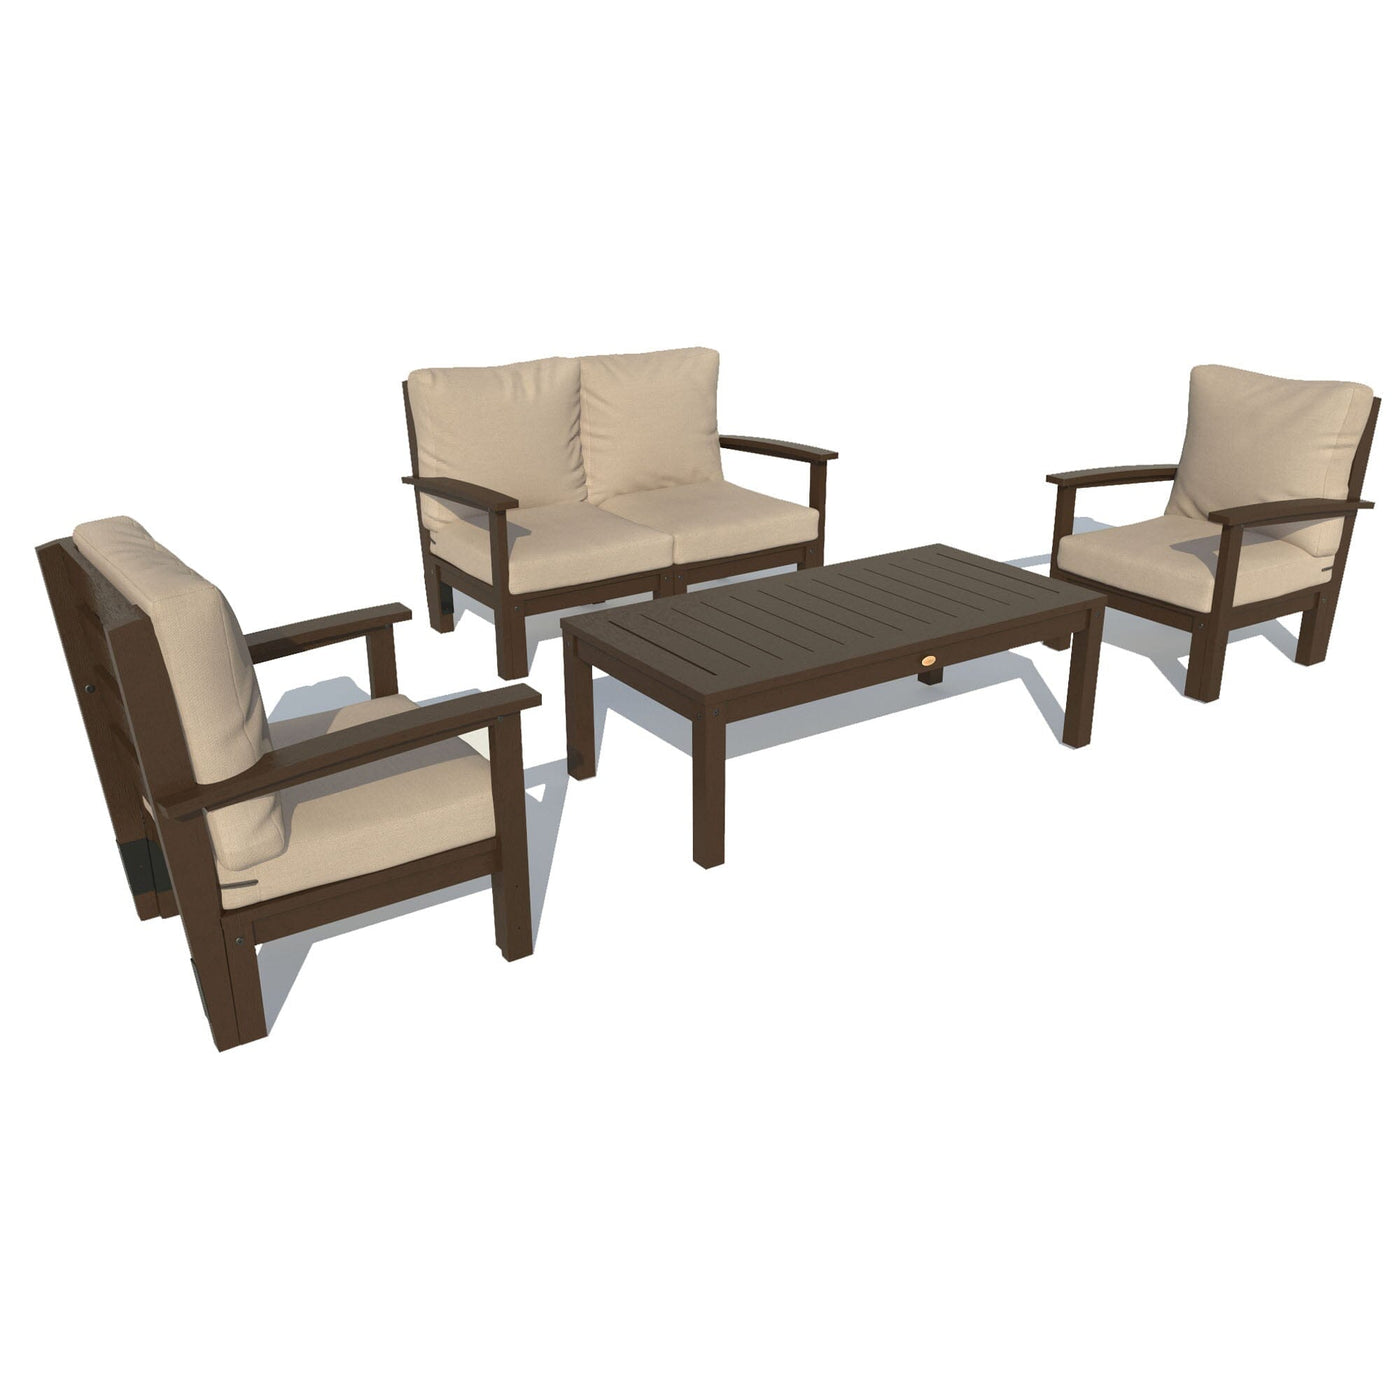 Bespoke Deep Seating: Loveseat, 2 Chair Set, and Conversation Table Deep Seating Highwood USA Driftwood Weathered Acorn 